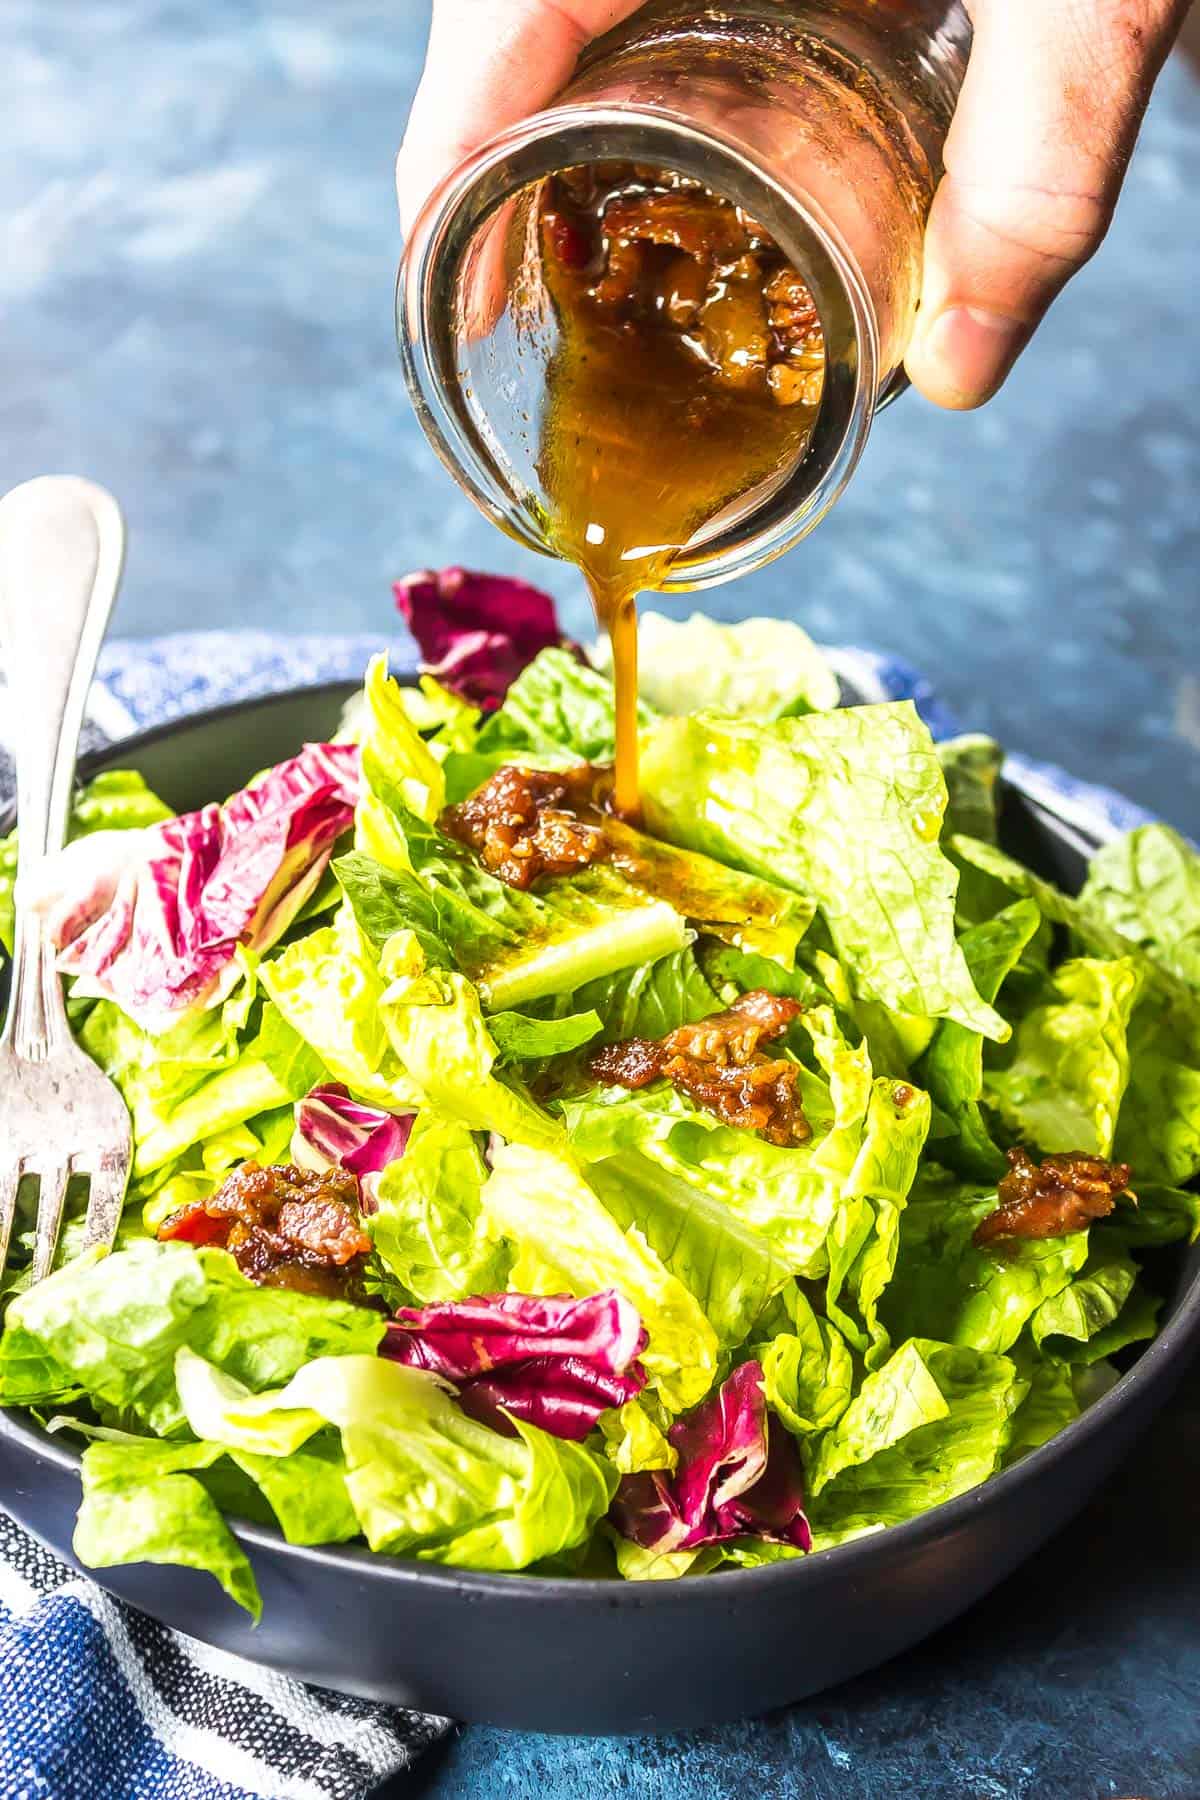 Hot Bacon Dressing being poured over leafy greens.